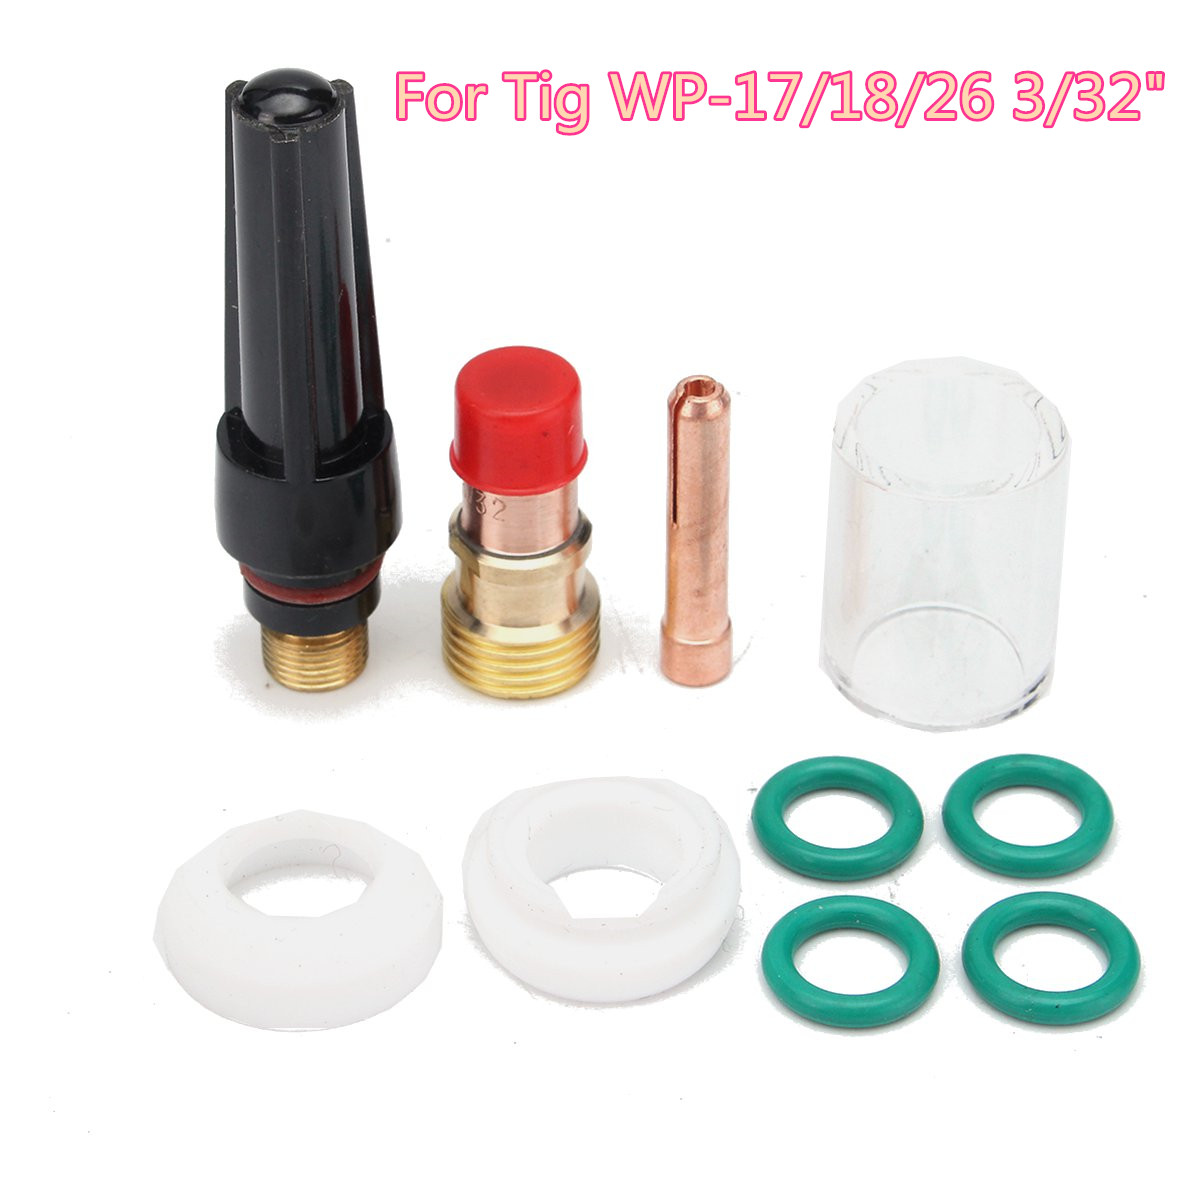 TIG-Welding-Gun-Accessories-24MM-Nozzle-Glass-Cover-for-WP-171826-332-1146810-9